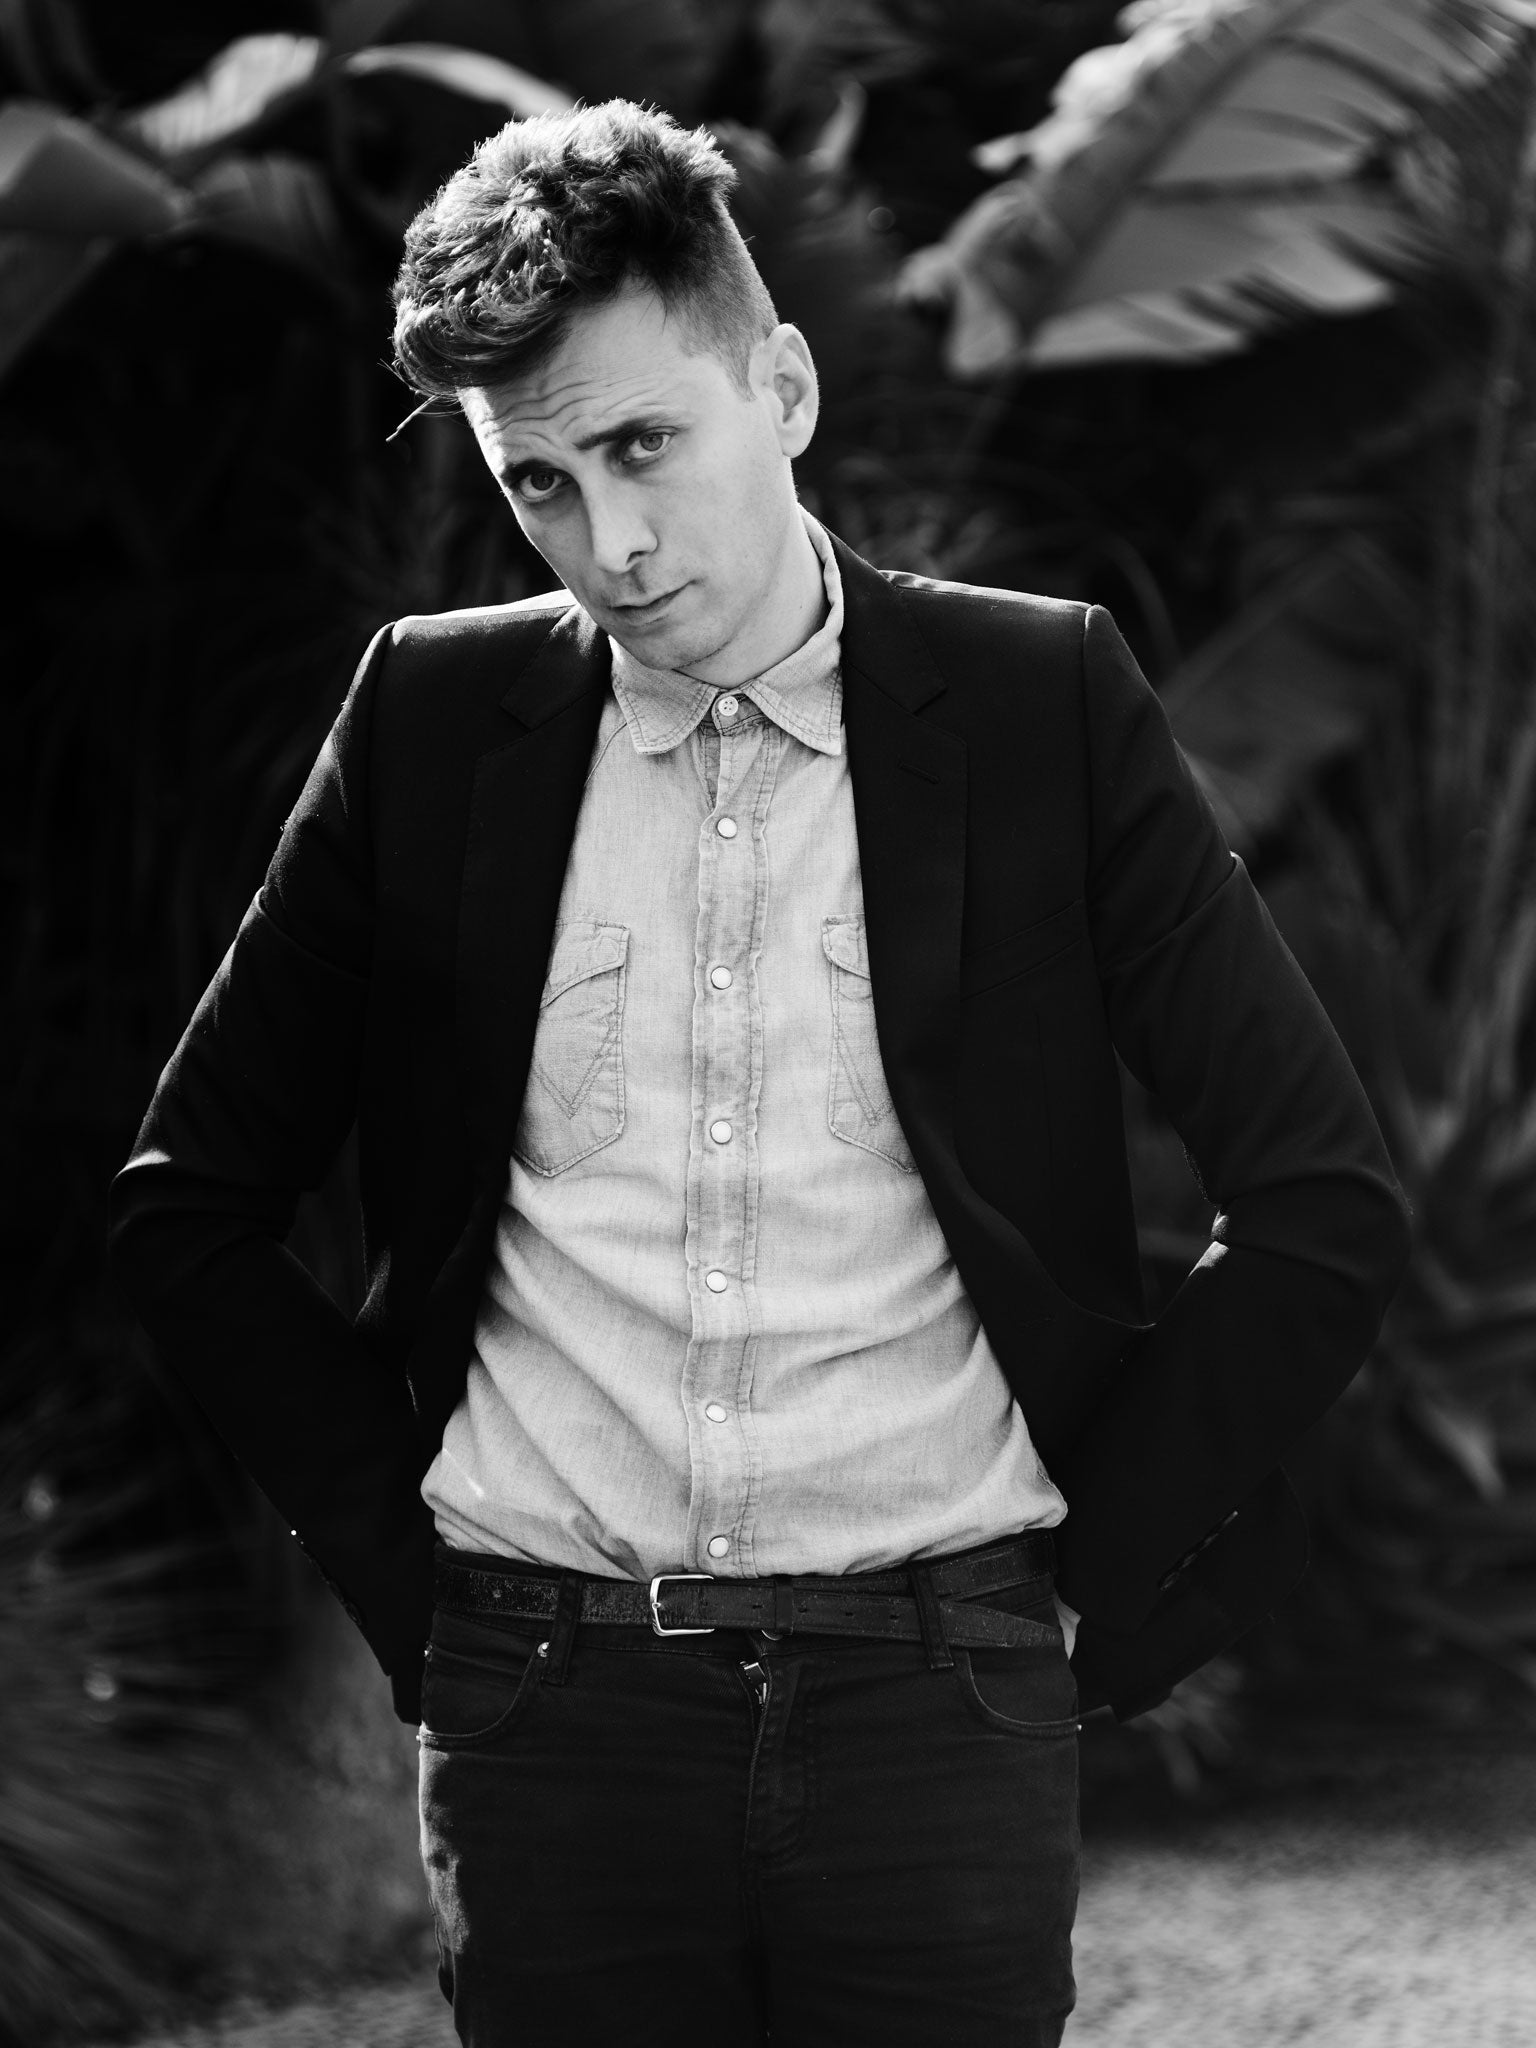 Hedi Slimane, creative director at Saint Laurent, where his haute couture stands at odds with the work, and the principles, of the label's founding father